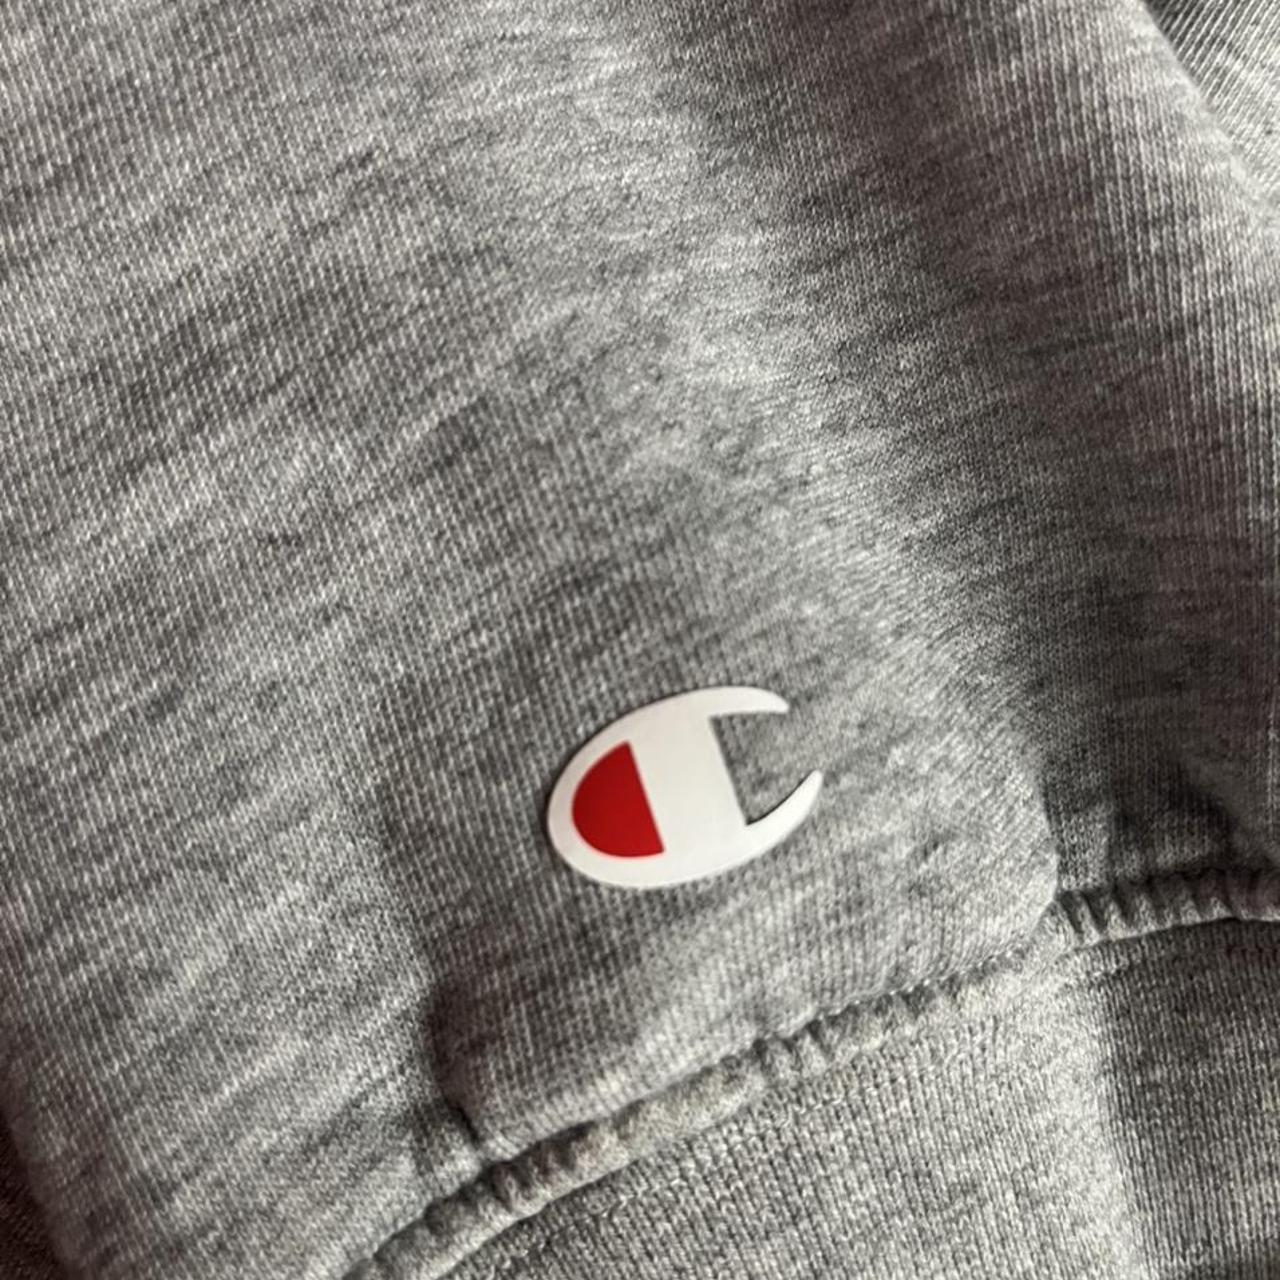 XL Champion hoodie grey fits more like a large, very... - Depop